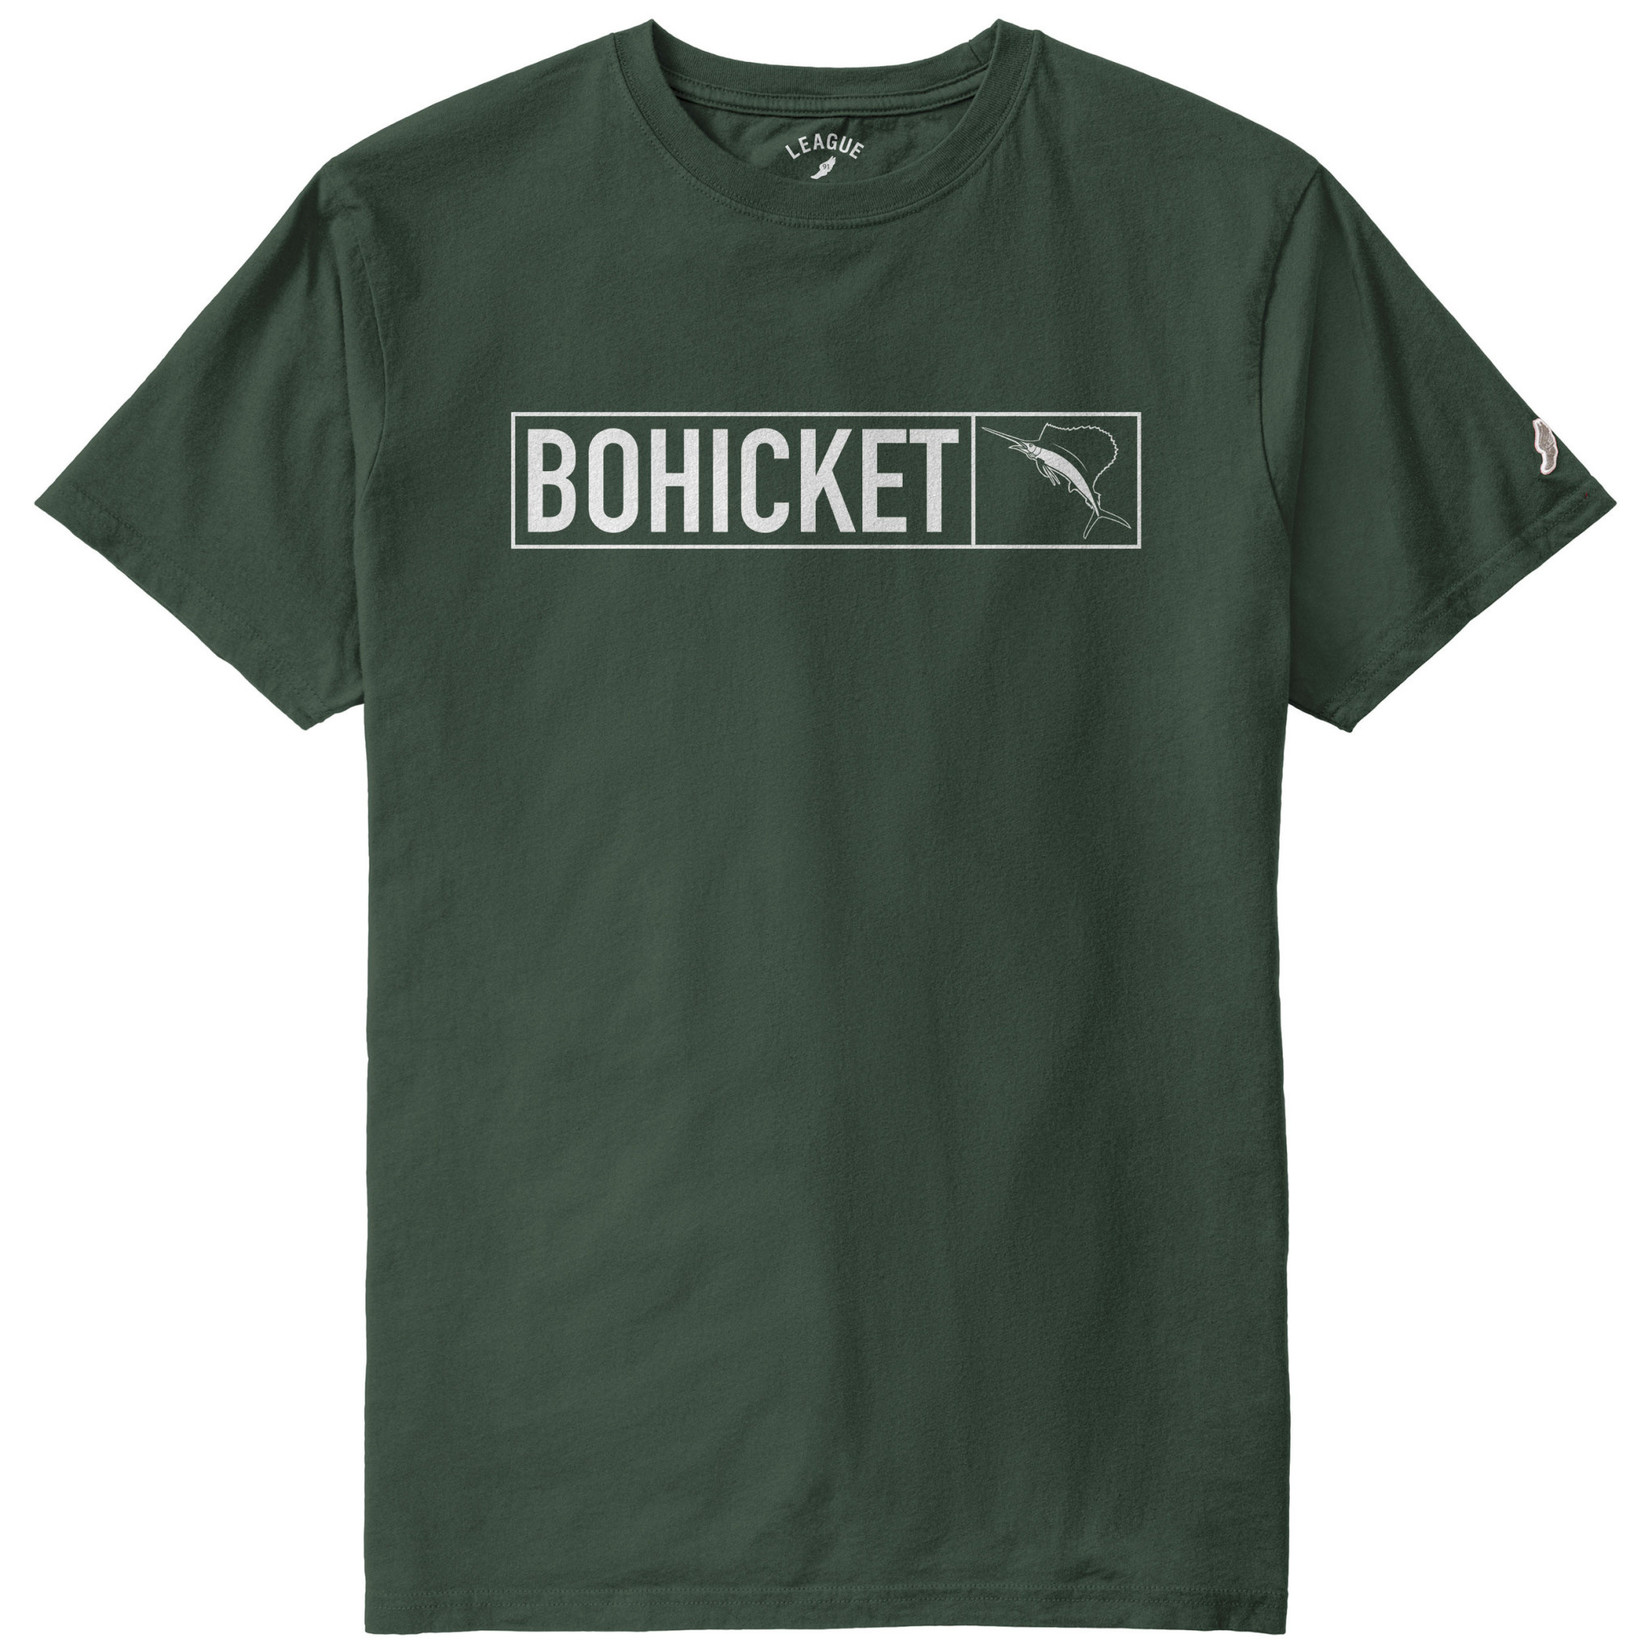 Bohicket All American S/S Vintage Hunter Green